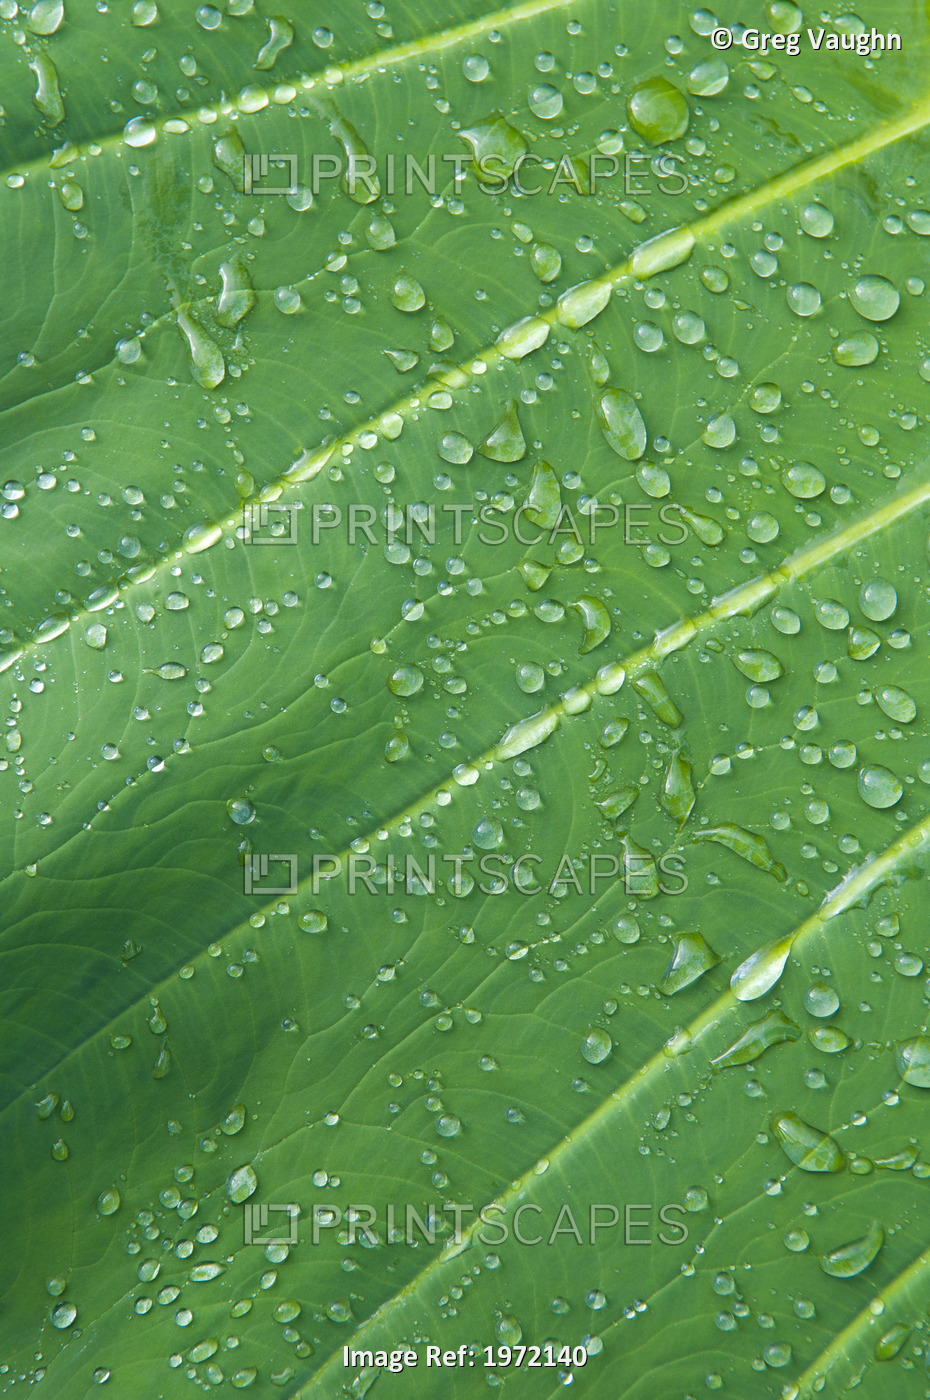 Hawaii, Maui, Extreme Close Up Of A Taro Leaf Covered In Water Droplets.